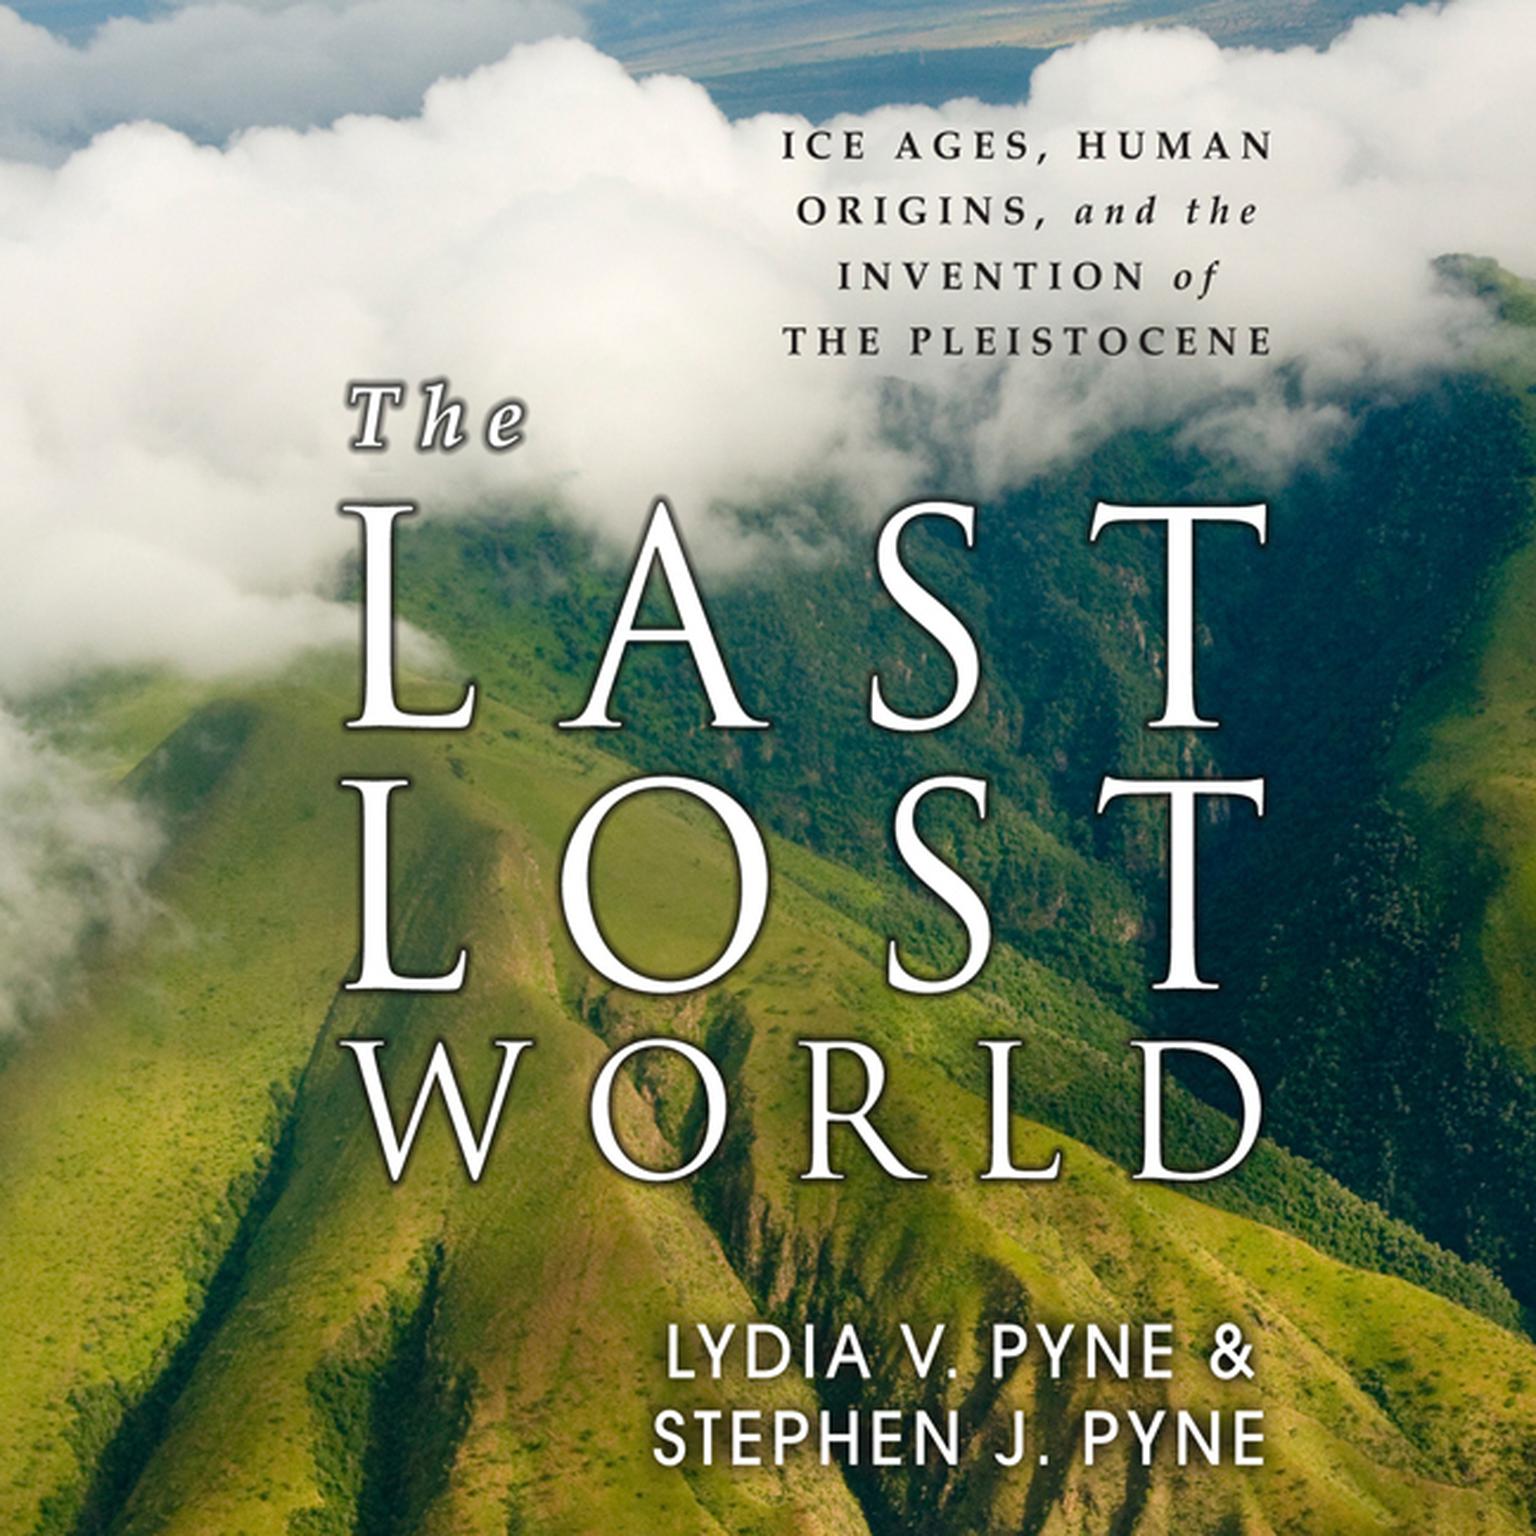 The Last Lost World: Ice Ages, Human Origins, and the Invention of the Pleistocene Audiobook, by Lydia V. Pyne